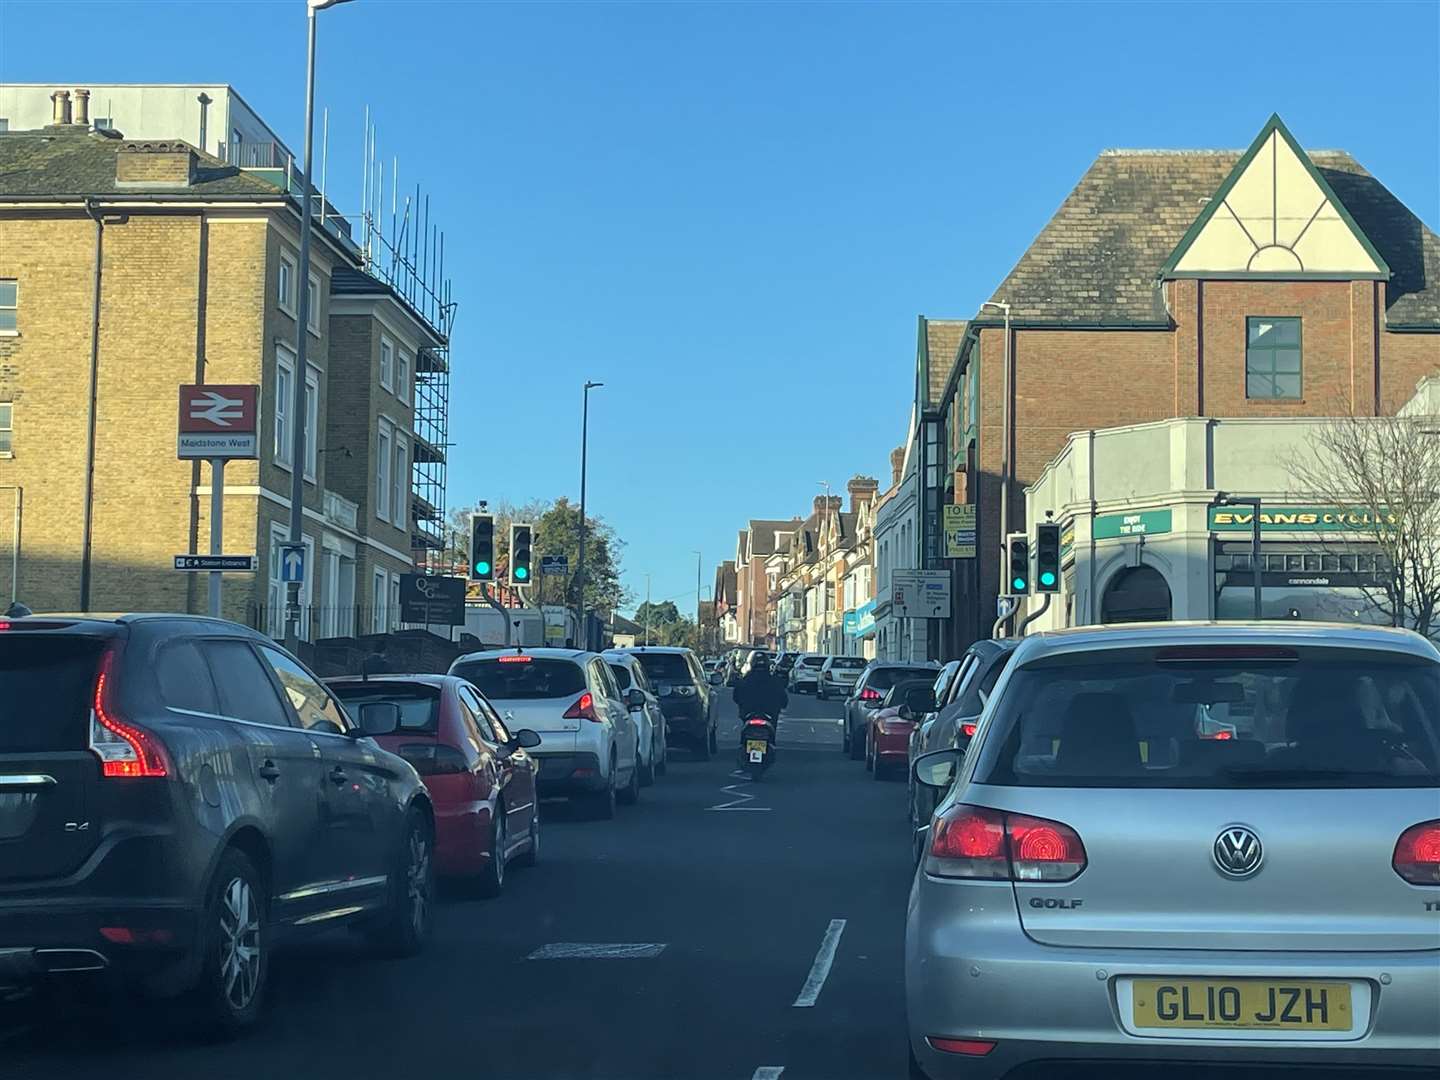 Increased congestion on the Tonbridge Road as a result of the closure